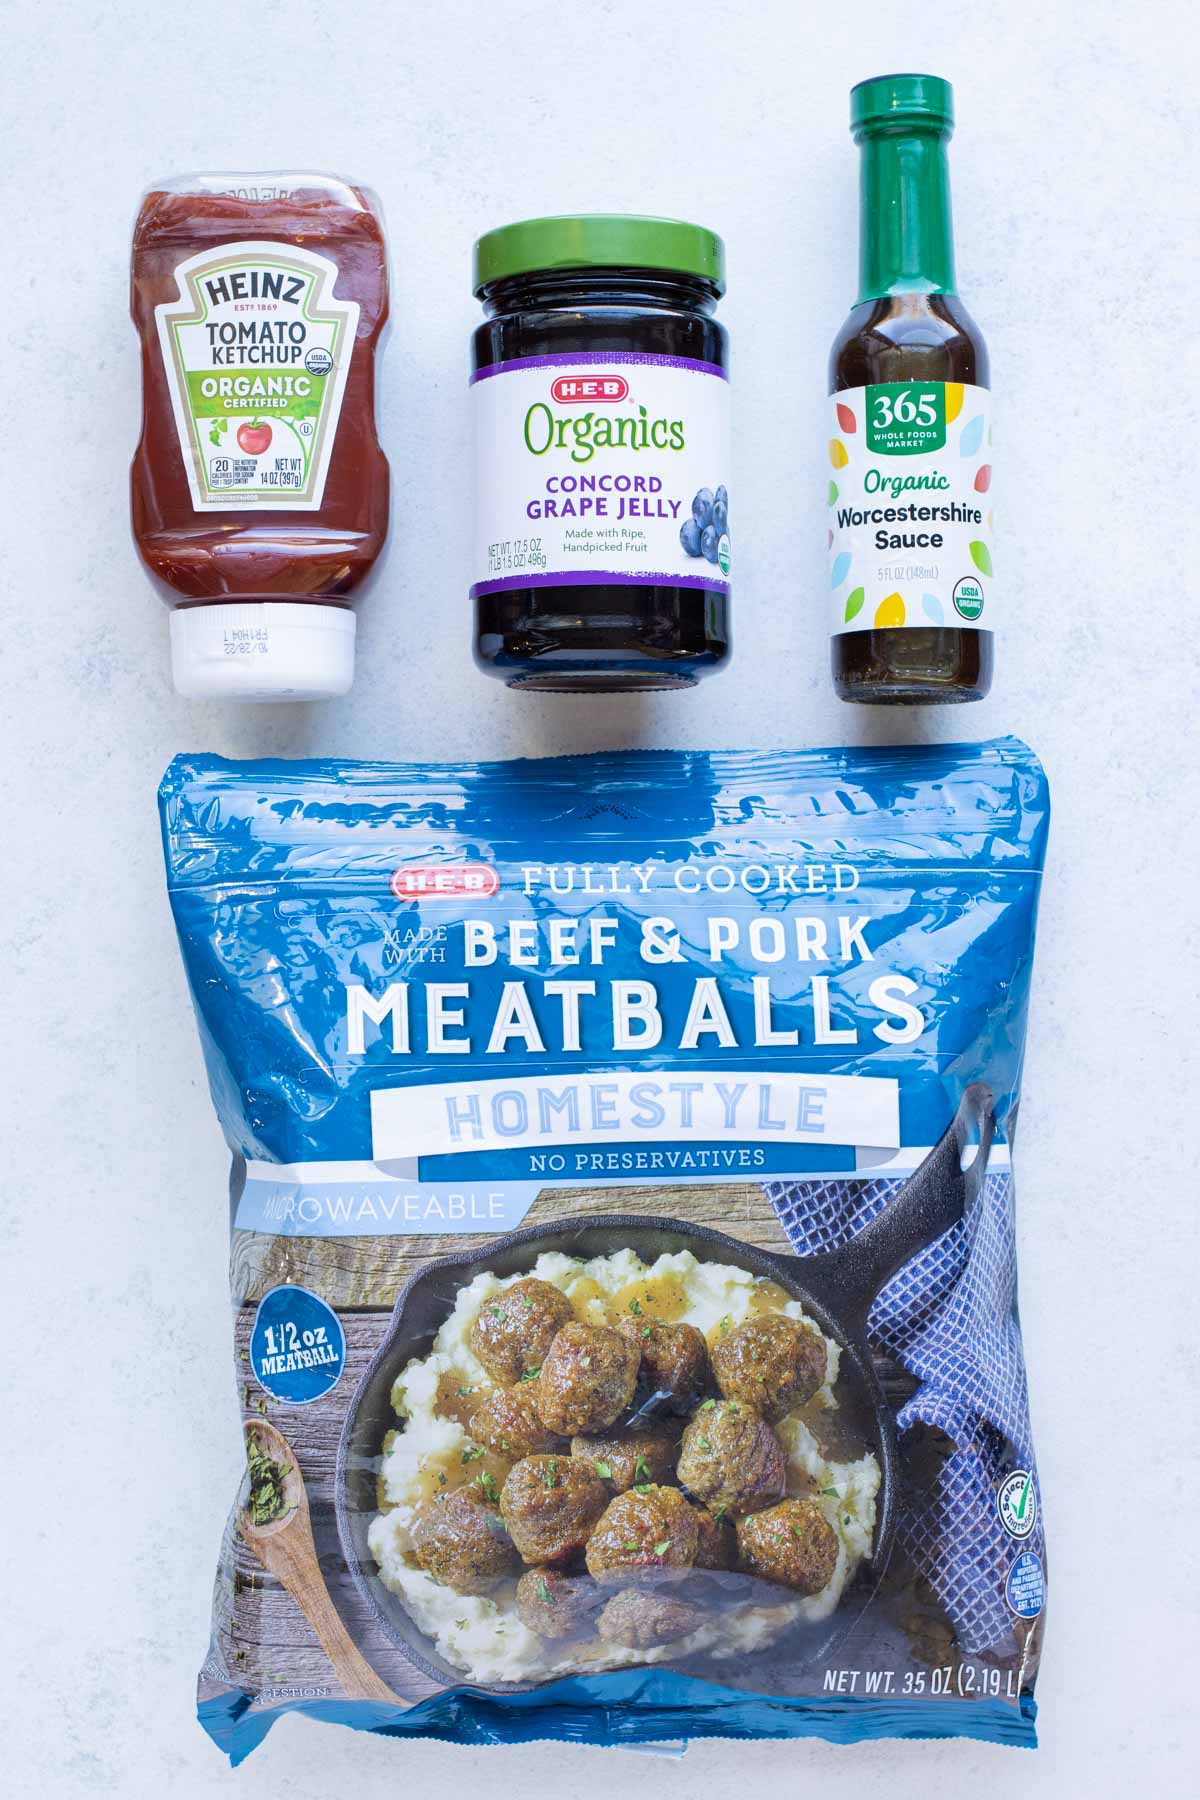 Meatballs, grape jelly, ketchup, and Worcestershire sauce are the ingredients for this recipe.